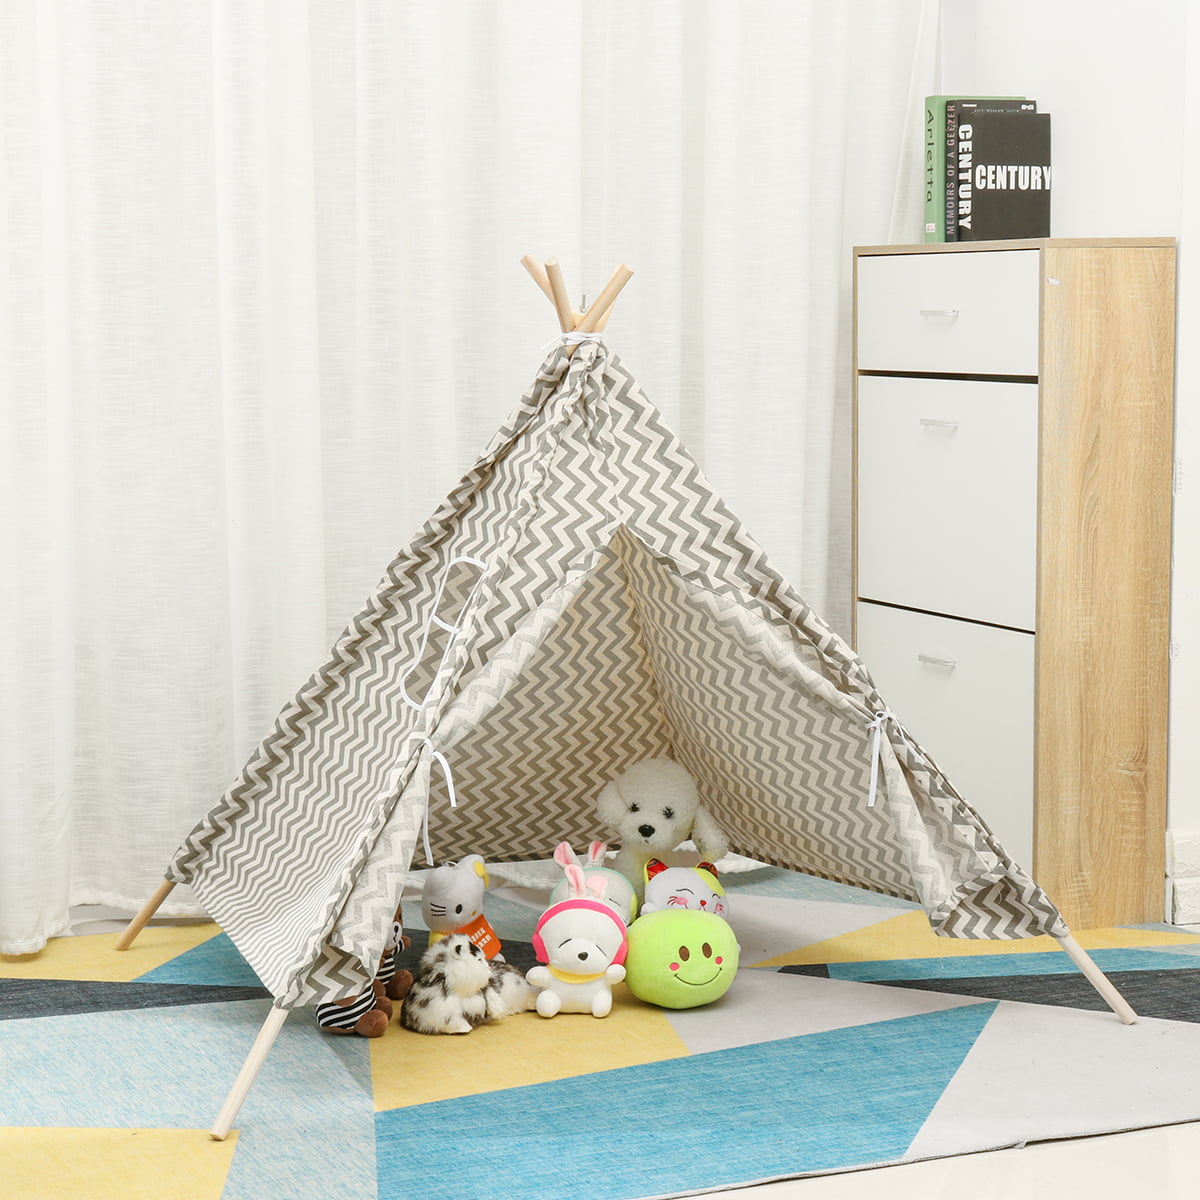 Details about   Kids Teepee Indoor Play Tent Cotton Canvas Children Indian Tipi Playhouse 